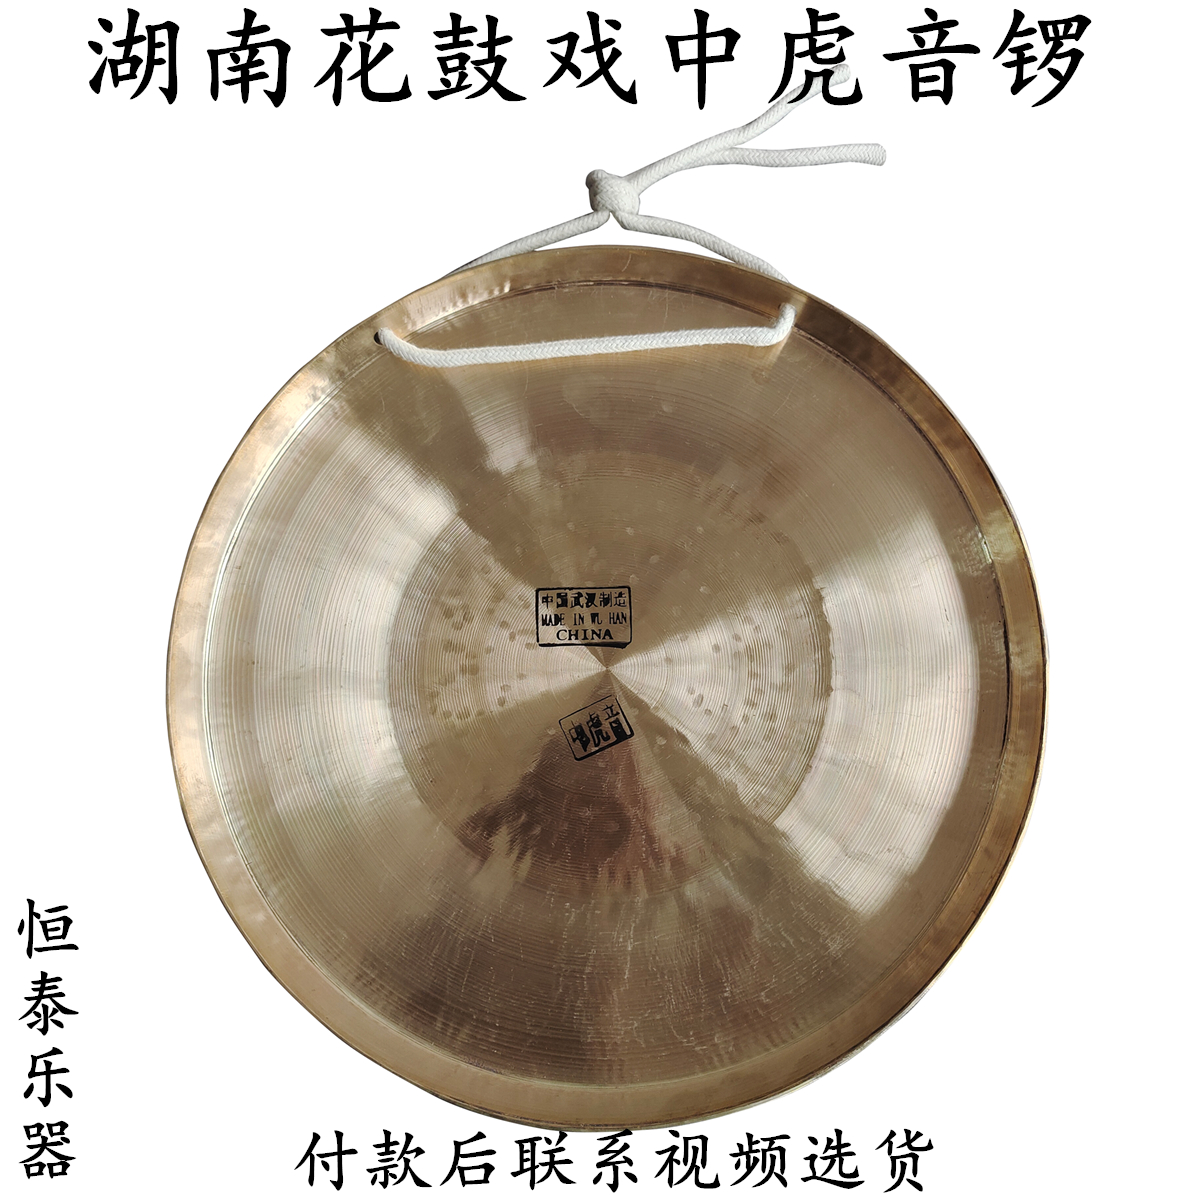 HUNAN FLOWER DRUM OPERA TIGER GONG TAOIST TAOIST GONG HAND HAND -OPENED WUHAN GONG ROUNDED   GONG 巳